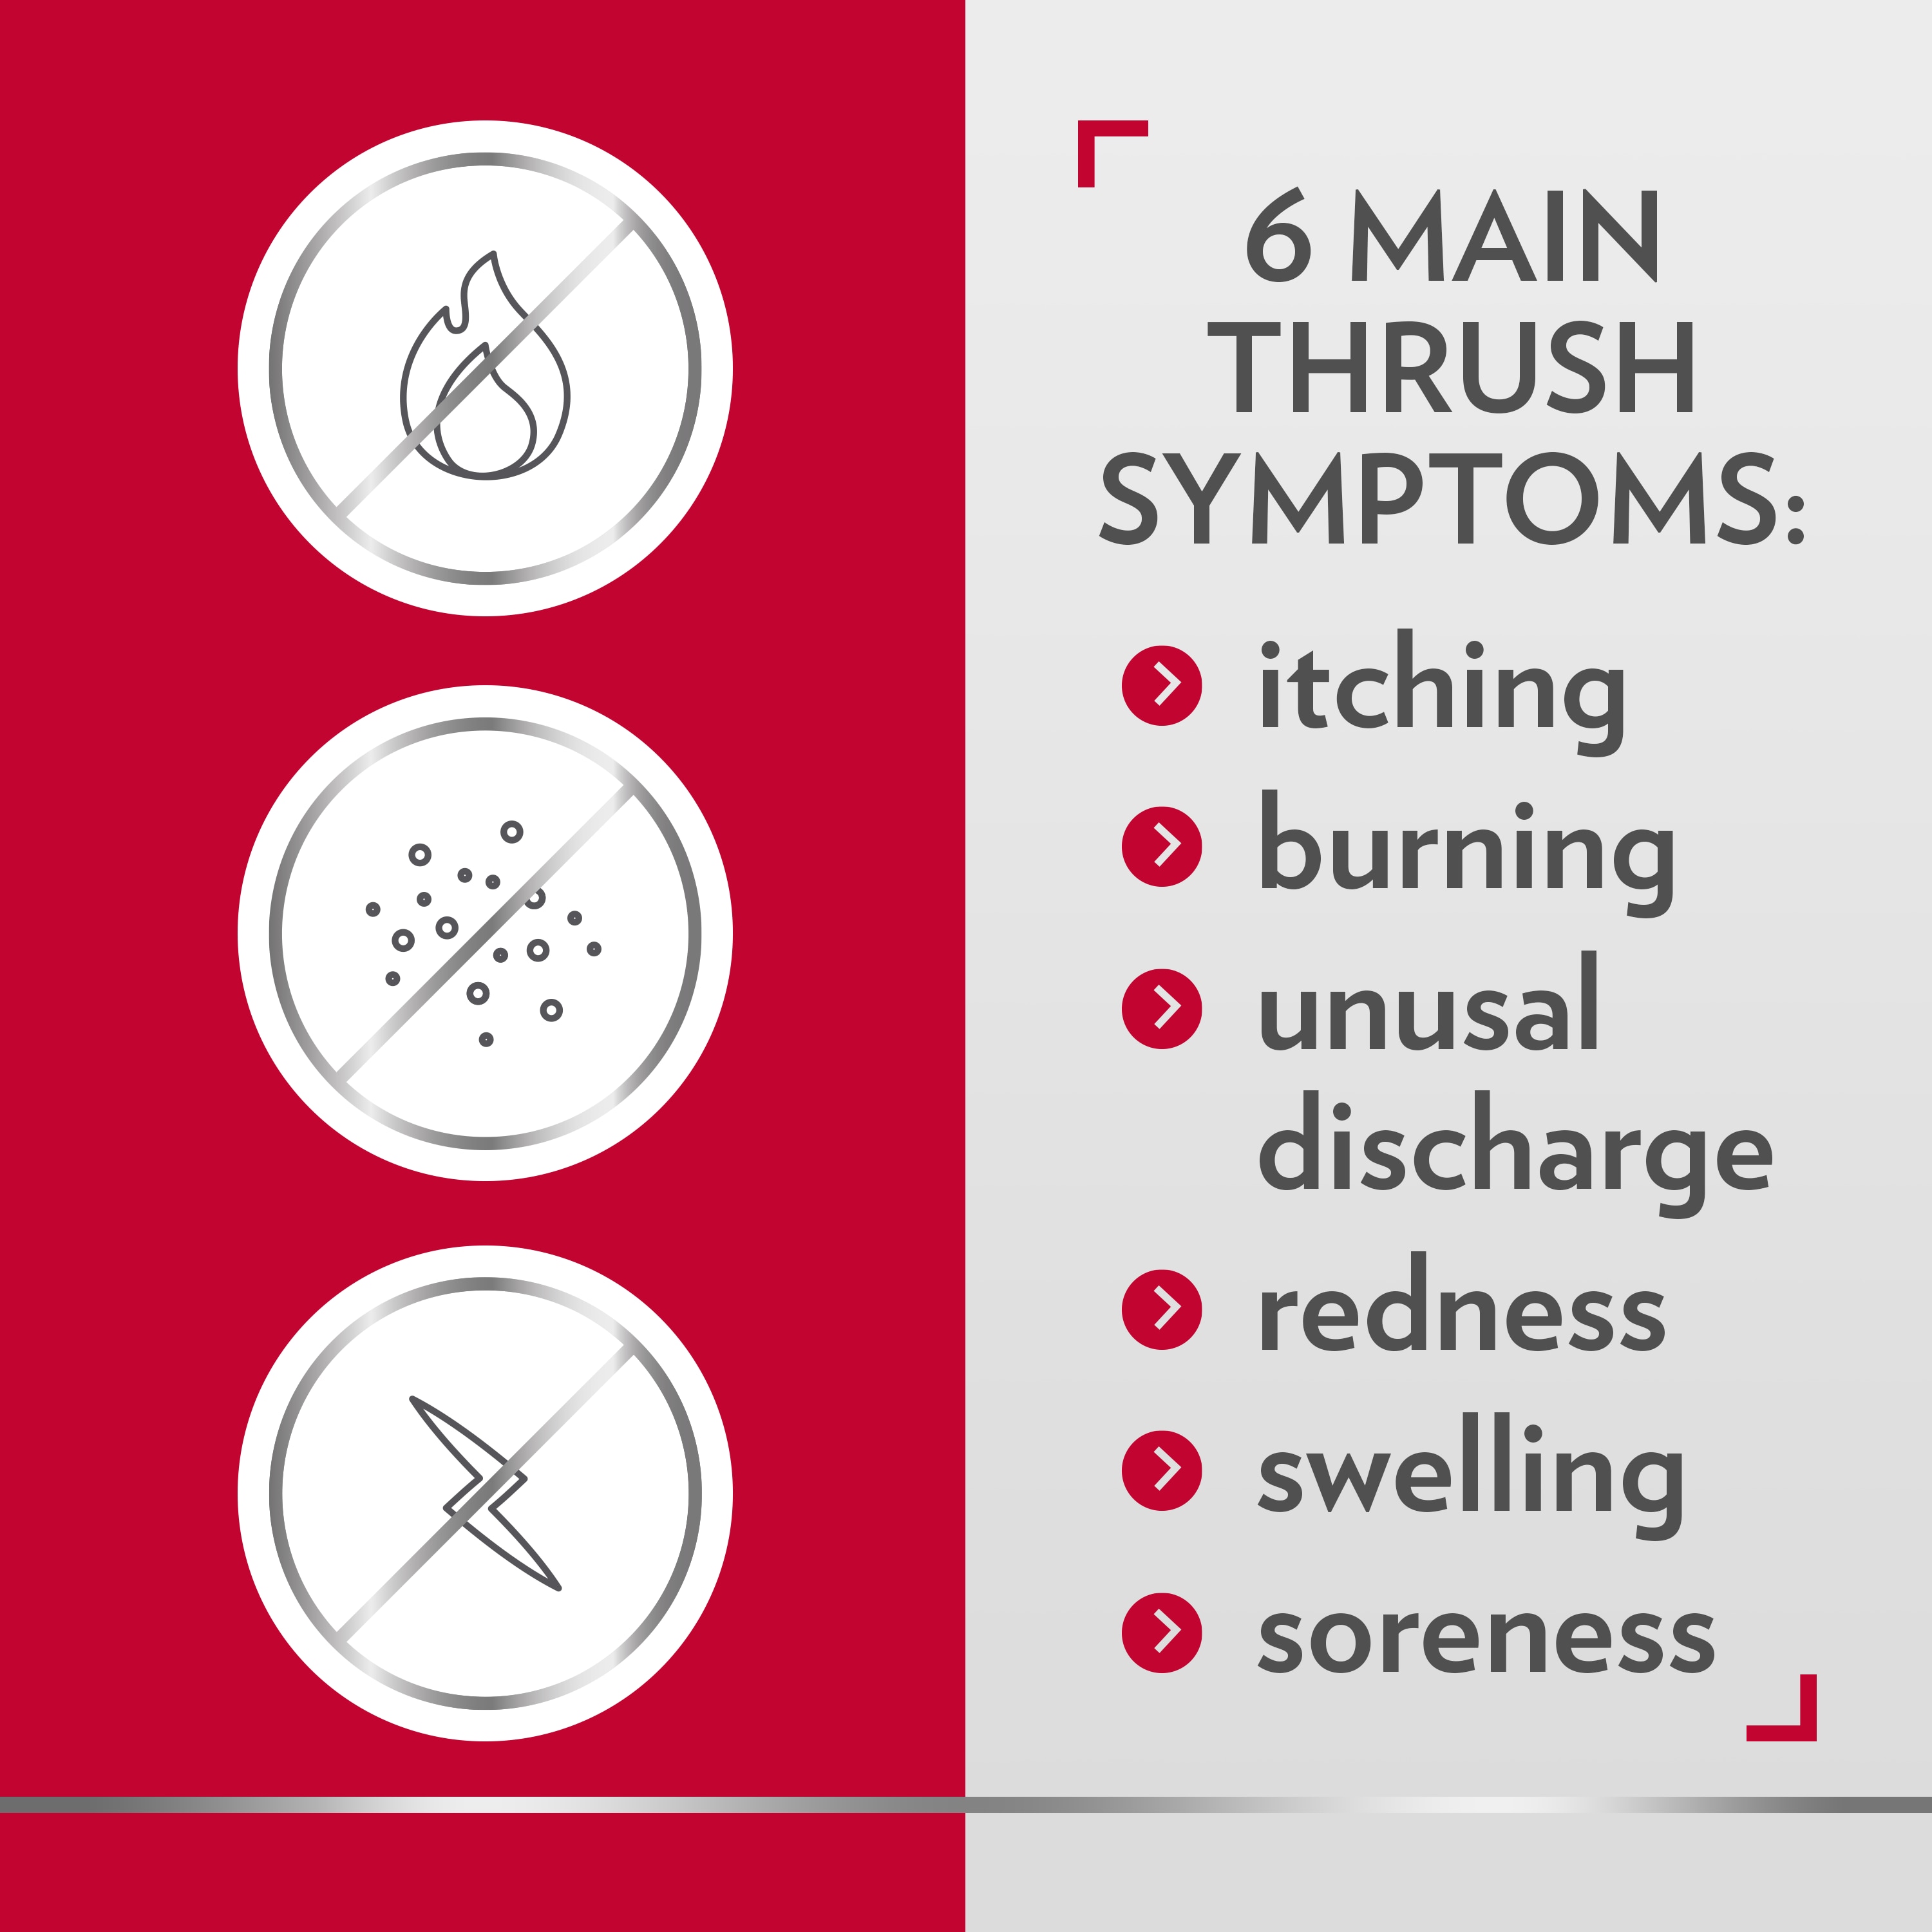 Three icons showing benefits of Canesten treatment, with caption on the right: 6 main thrush symptoms: itching, burning, unusual discharge, redness, swelling, soreness 